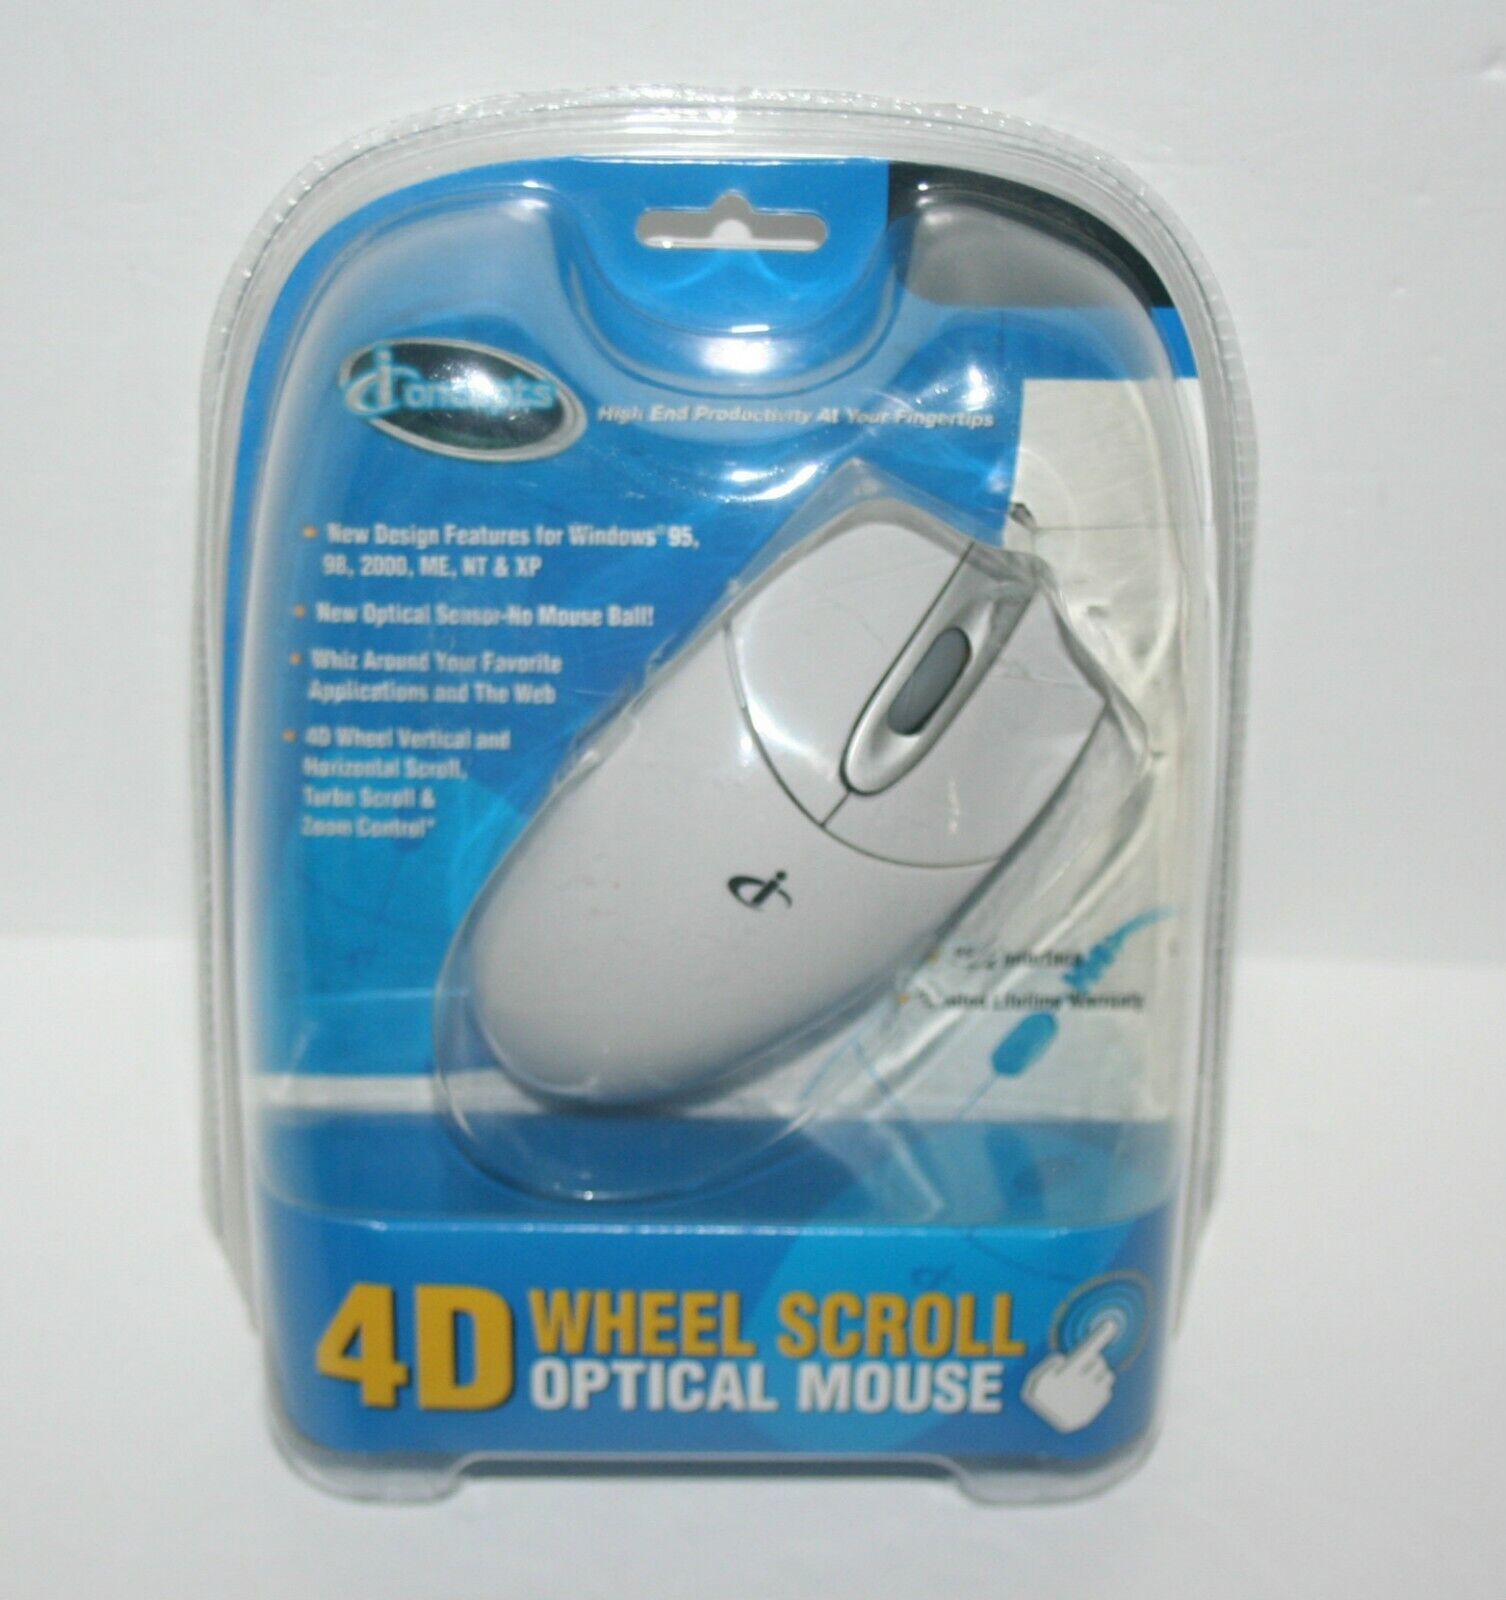 iConcepts 4D Wheel Scroll Computer Mouse - Model 77252 - New O...